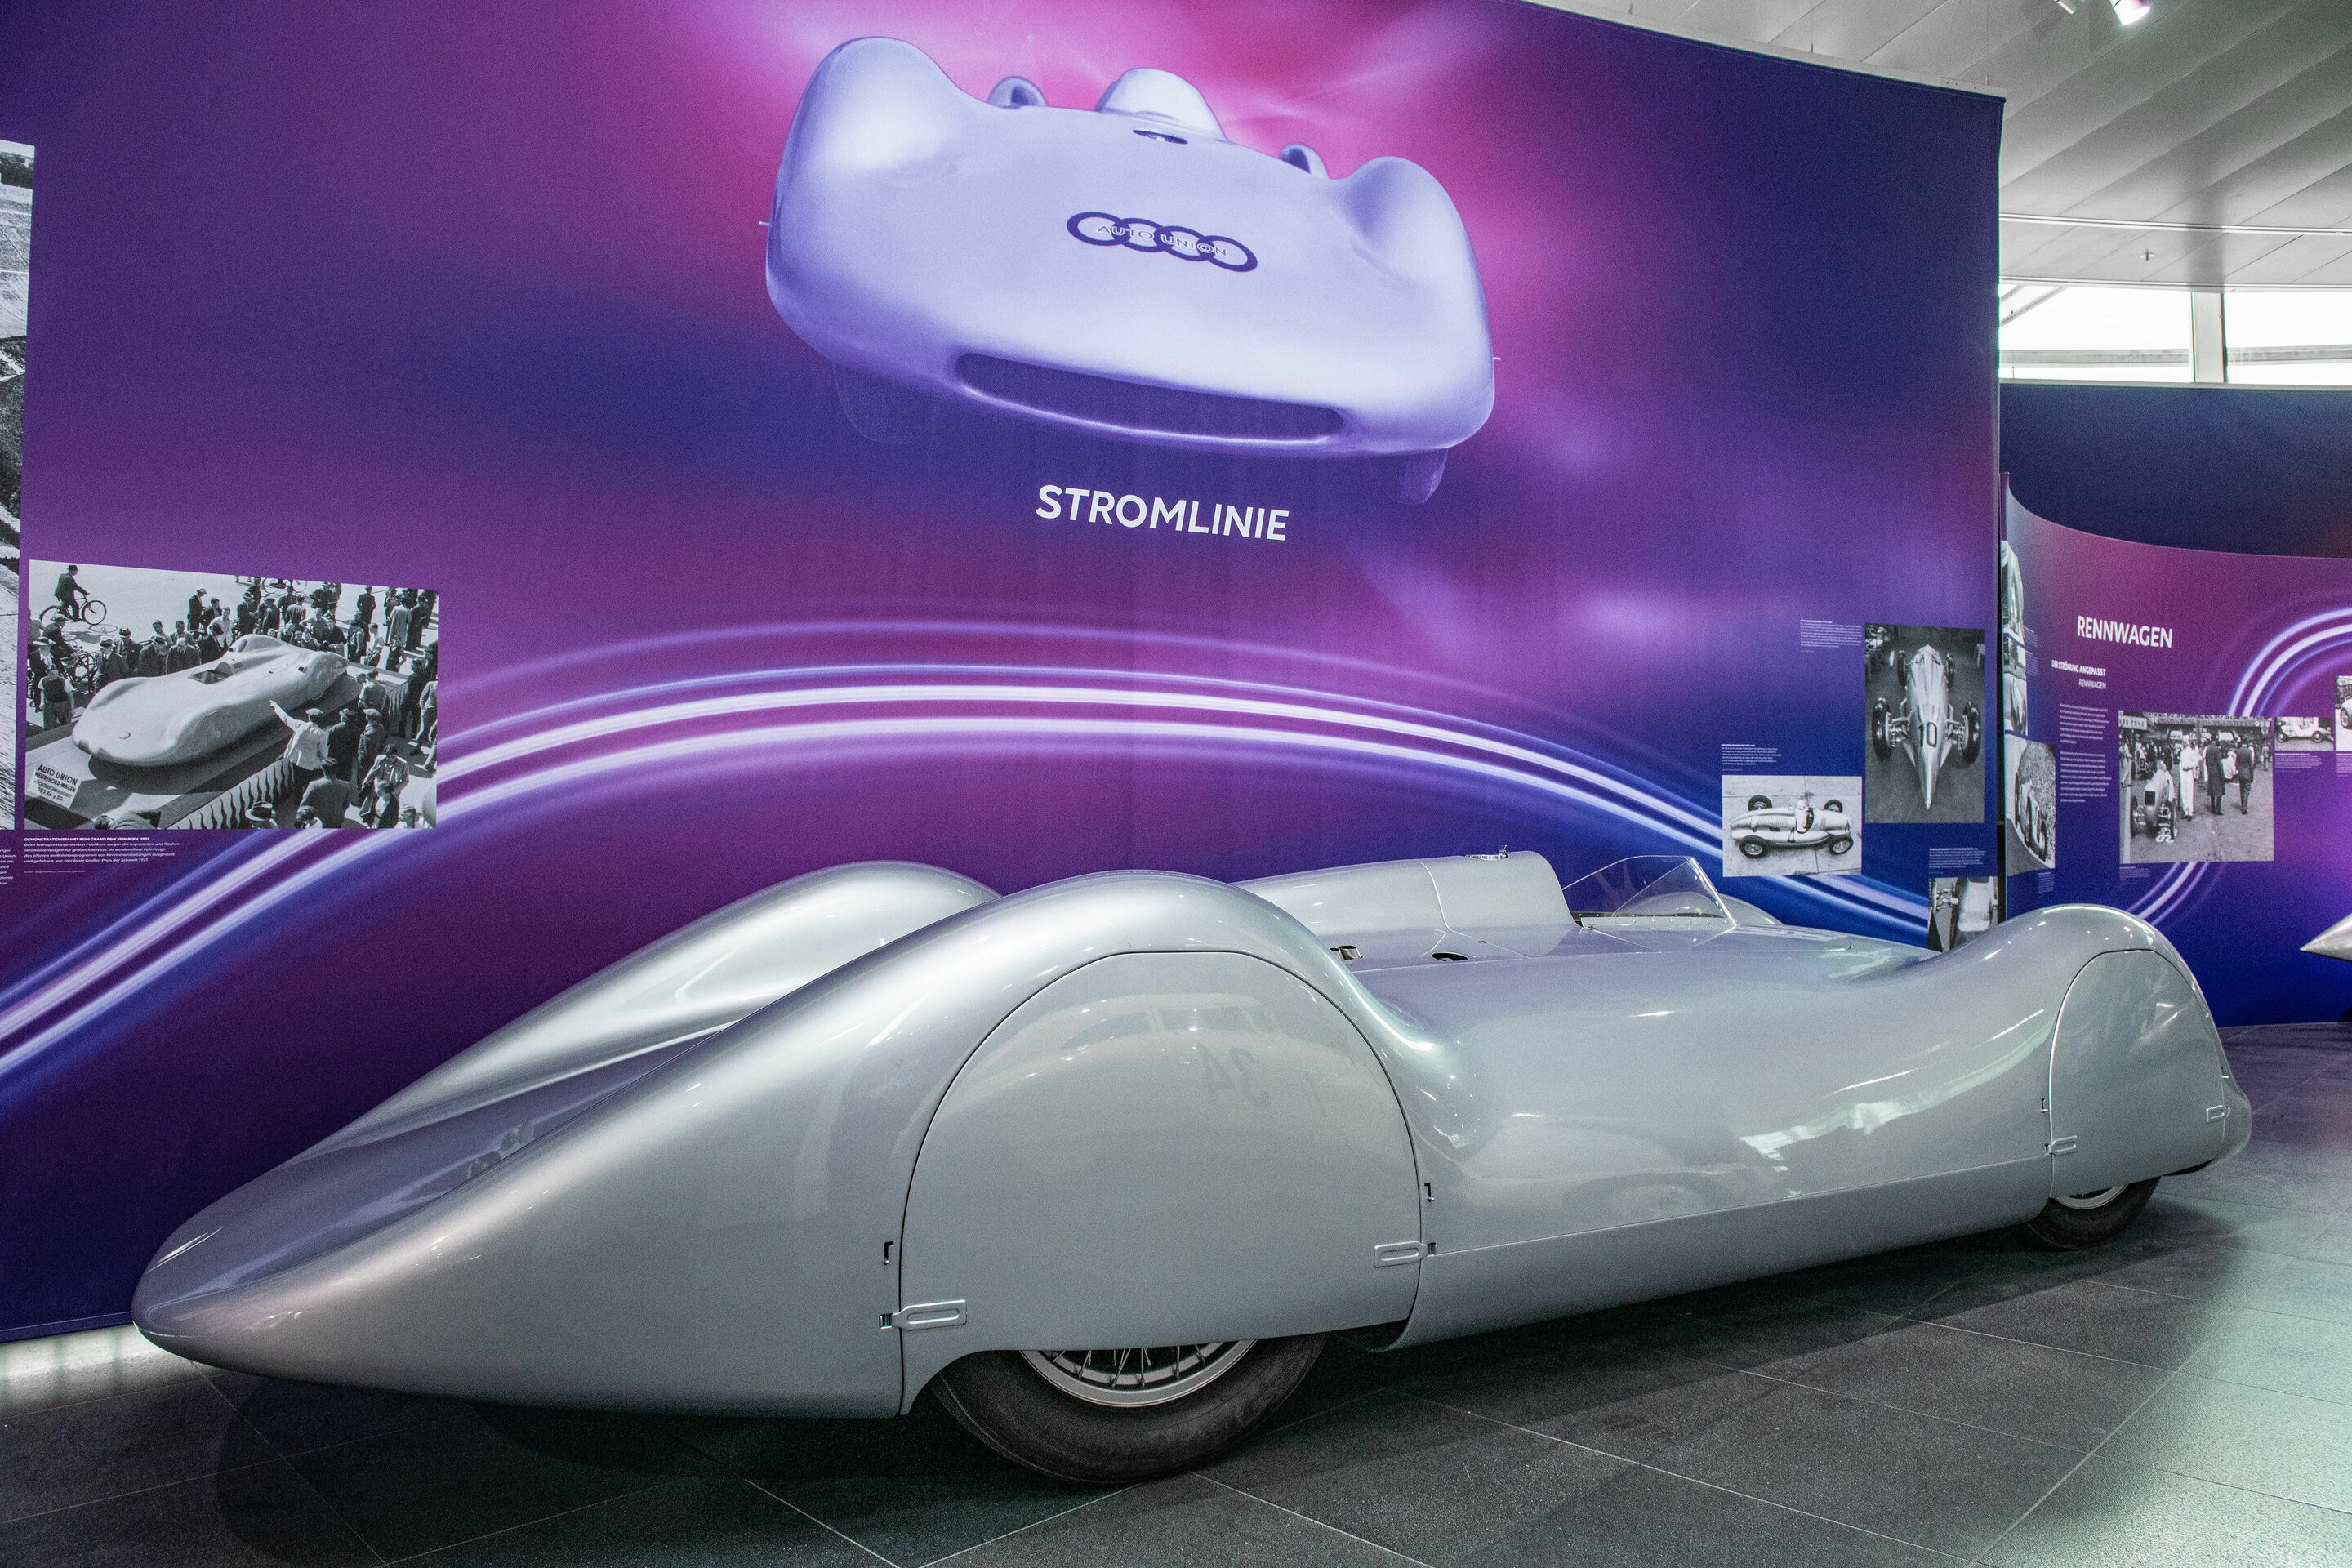 Things are going streamlined at the Audi museum mobile